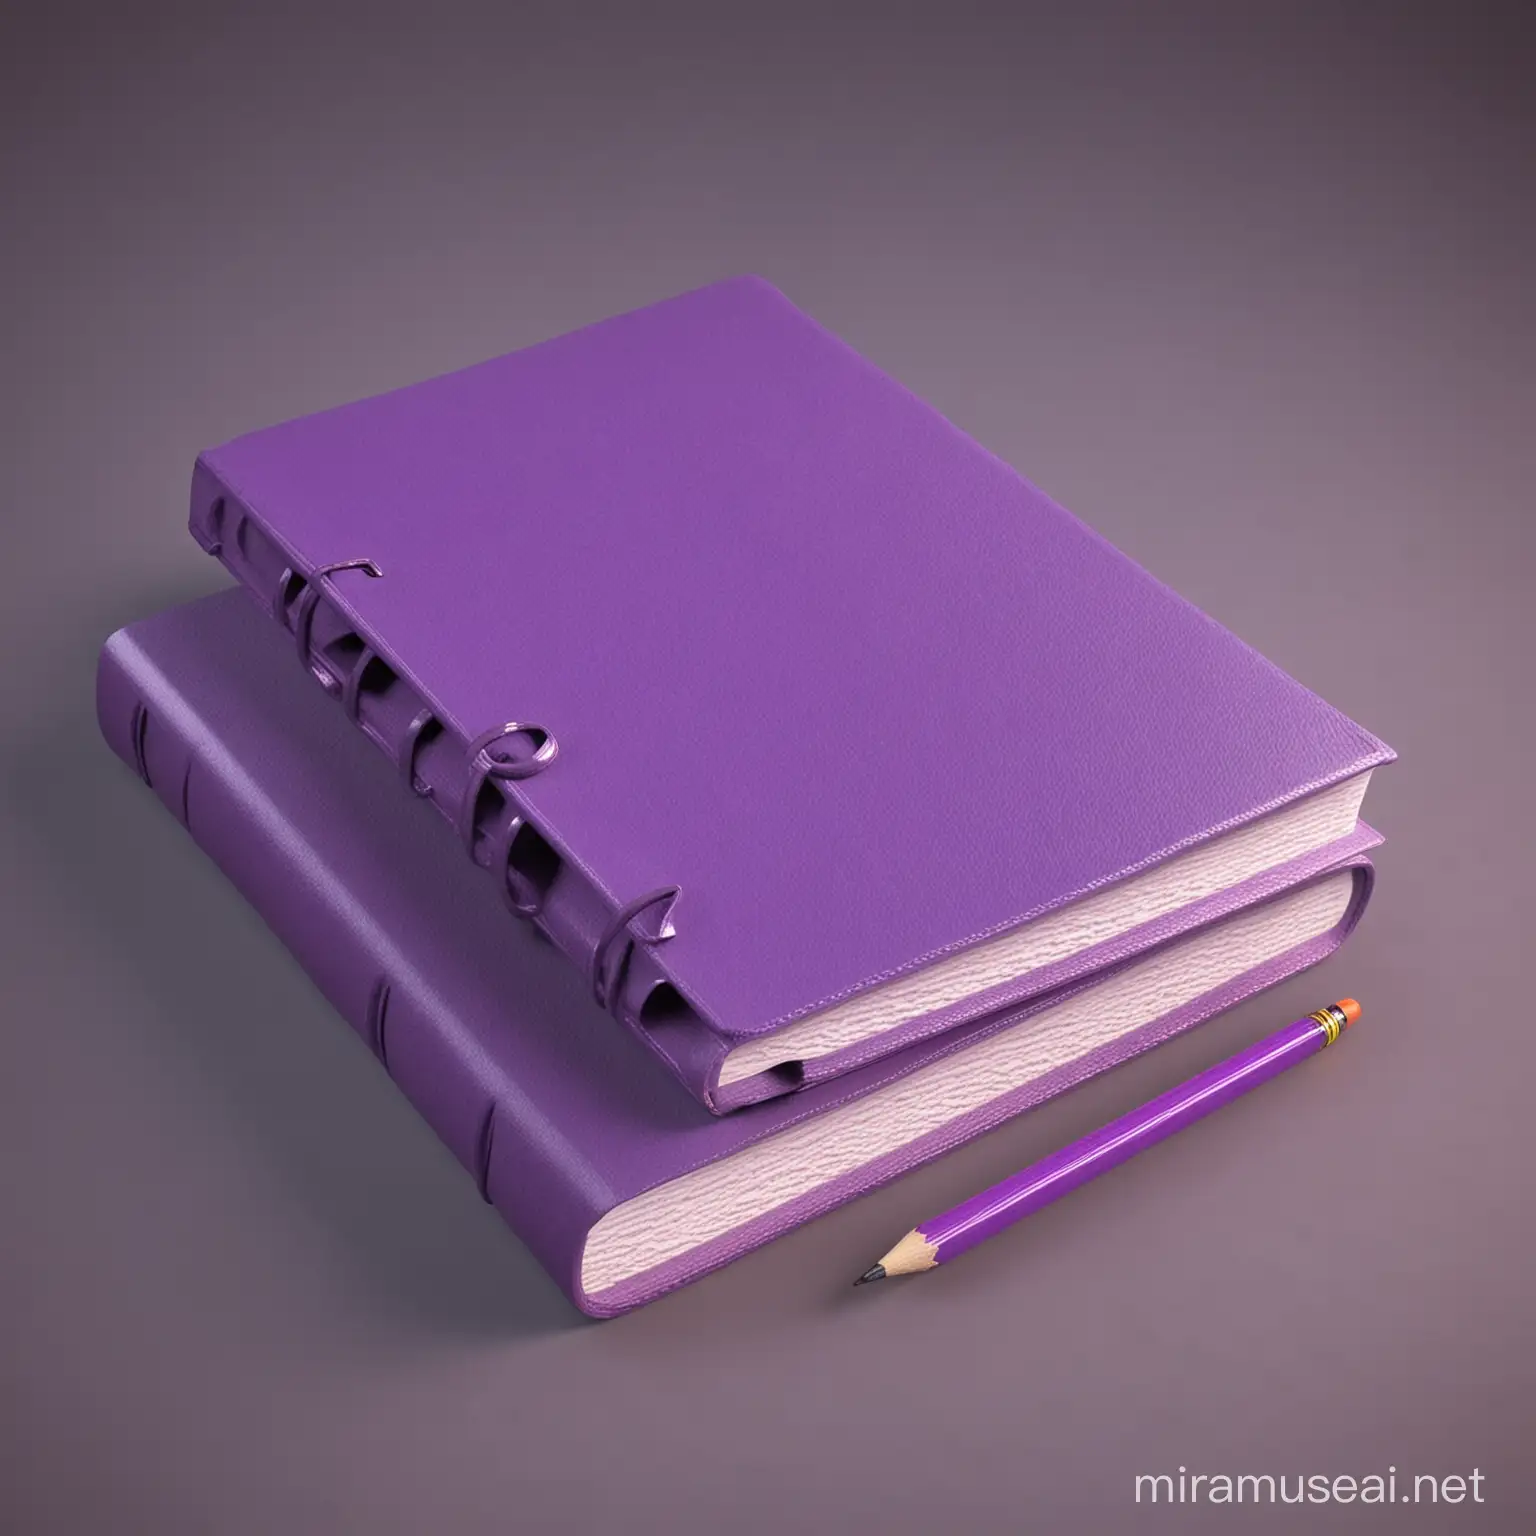 Vibrant Purple 3D Rendered Book and Pencil